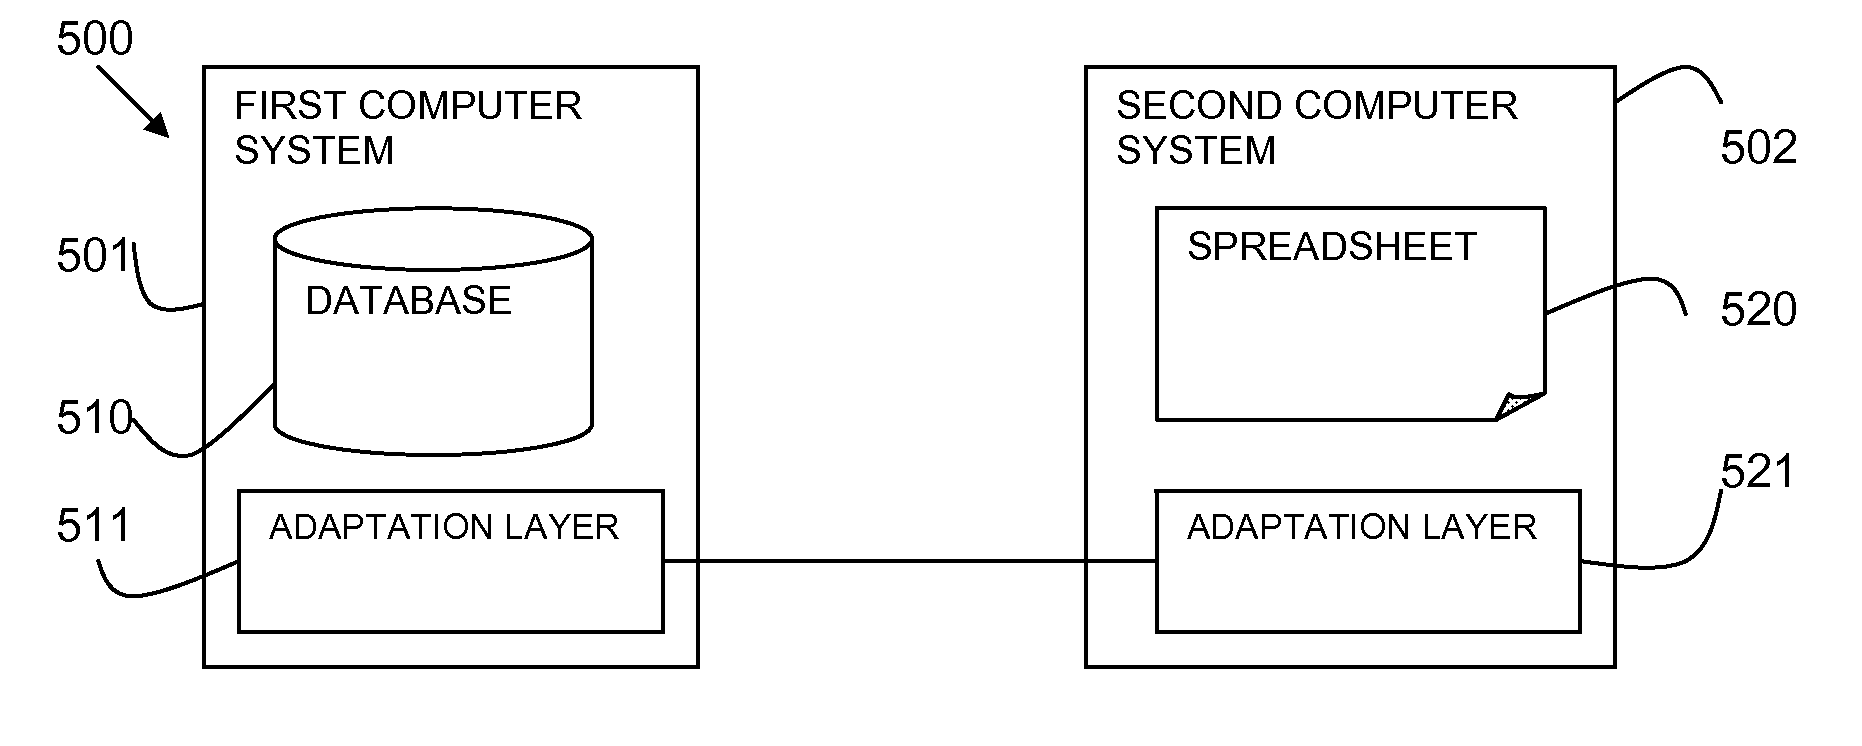 Synchronization of data between systems